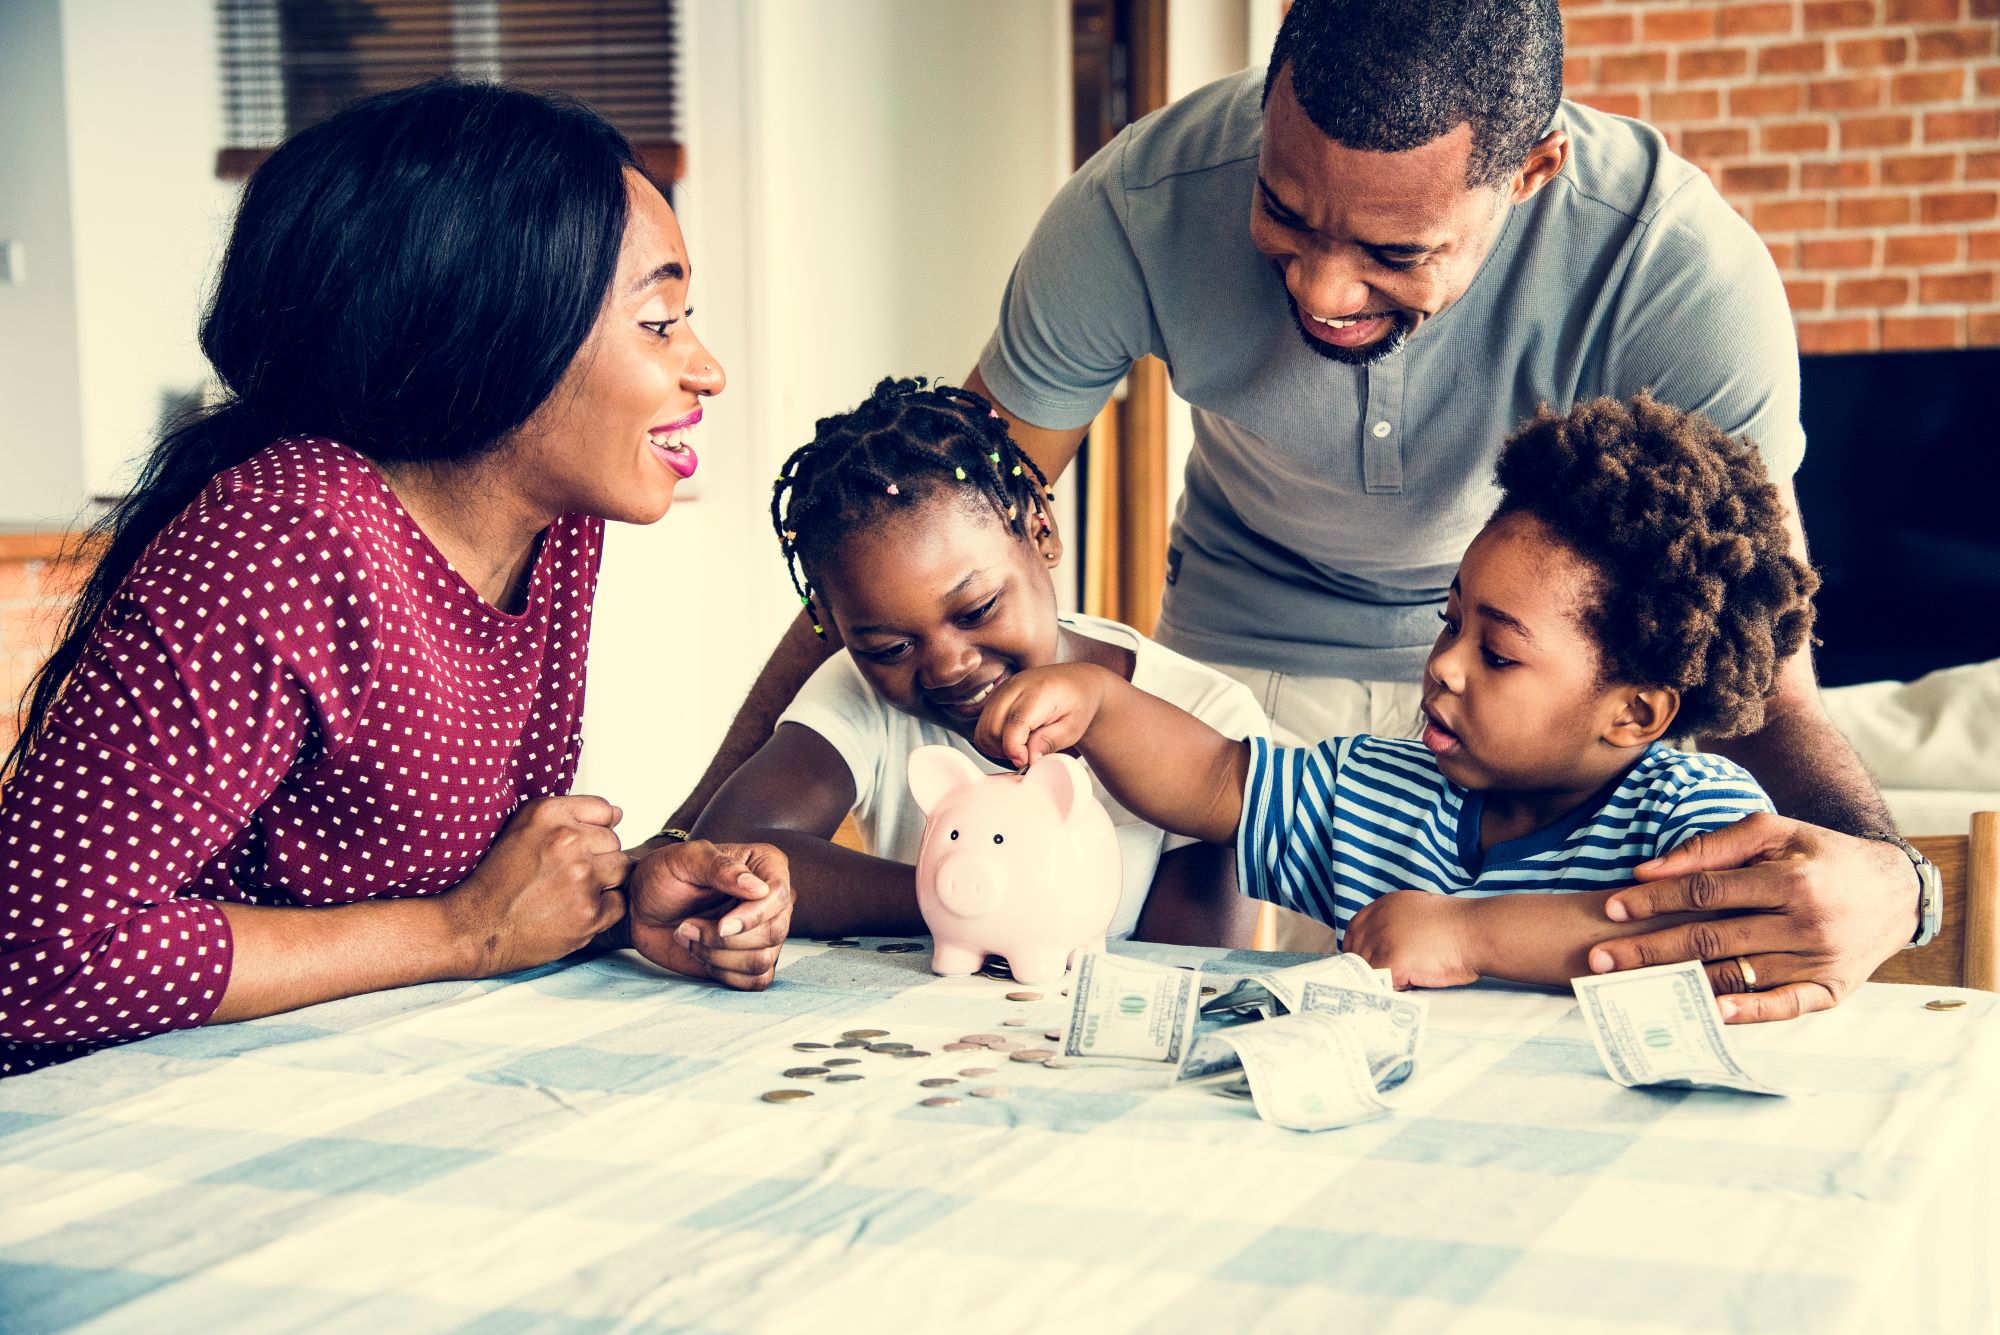 A young African family, dada, mom, and two children putting money in a piggy bank - saving for a SACCO